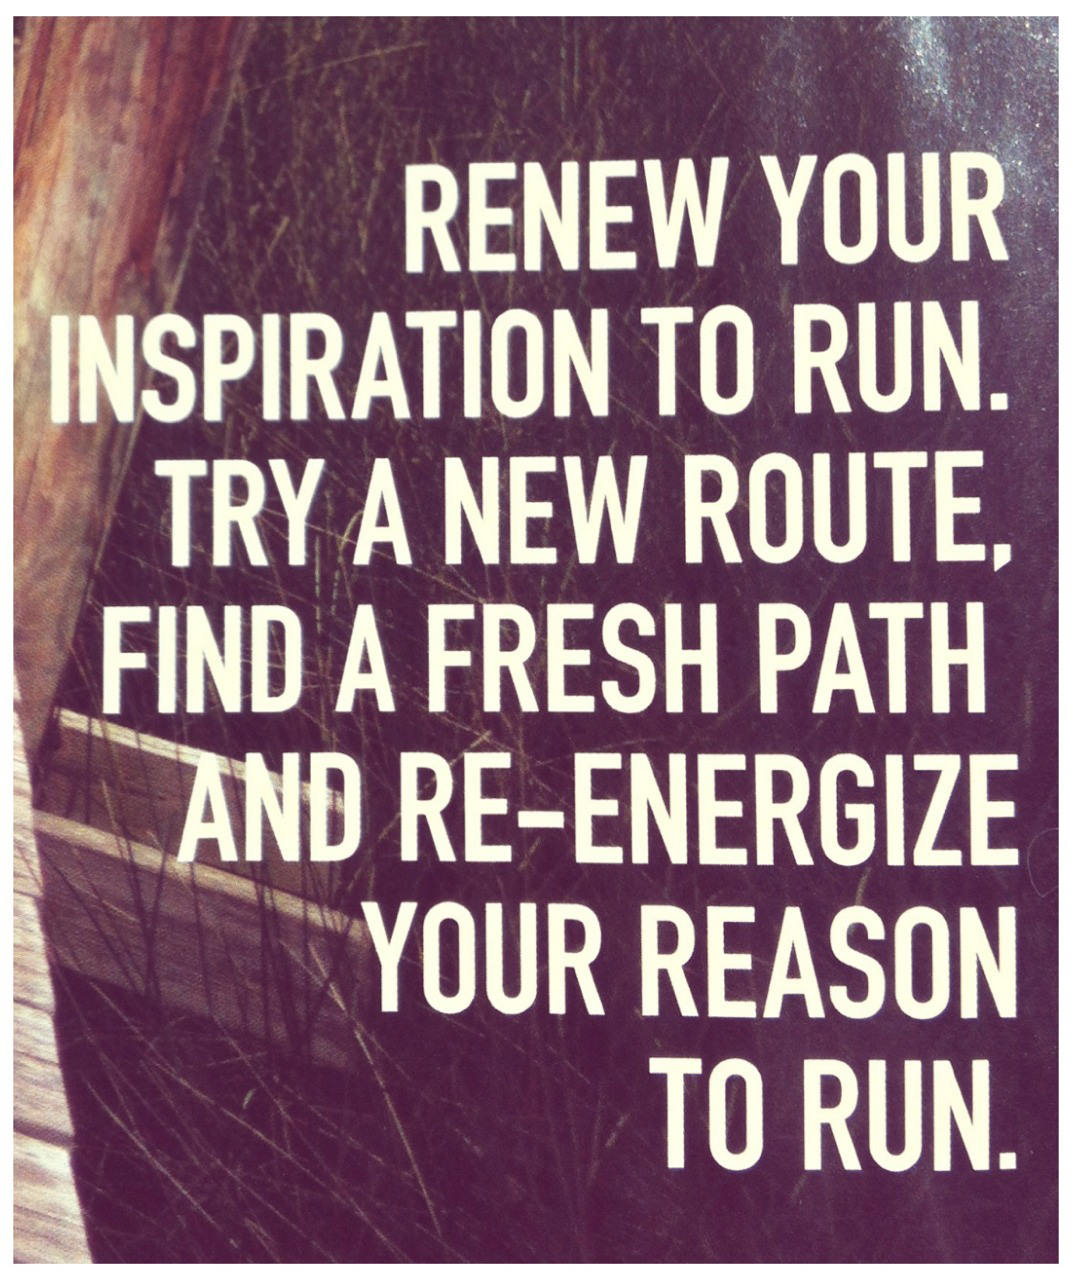 Runner Things #3: Renew your inspiration to run. Try a new route, find a fresh path and re-energize your reason to run.